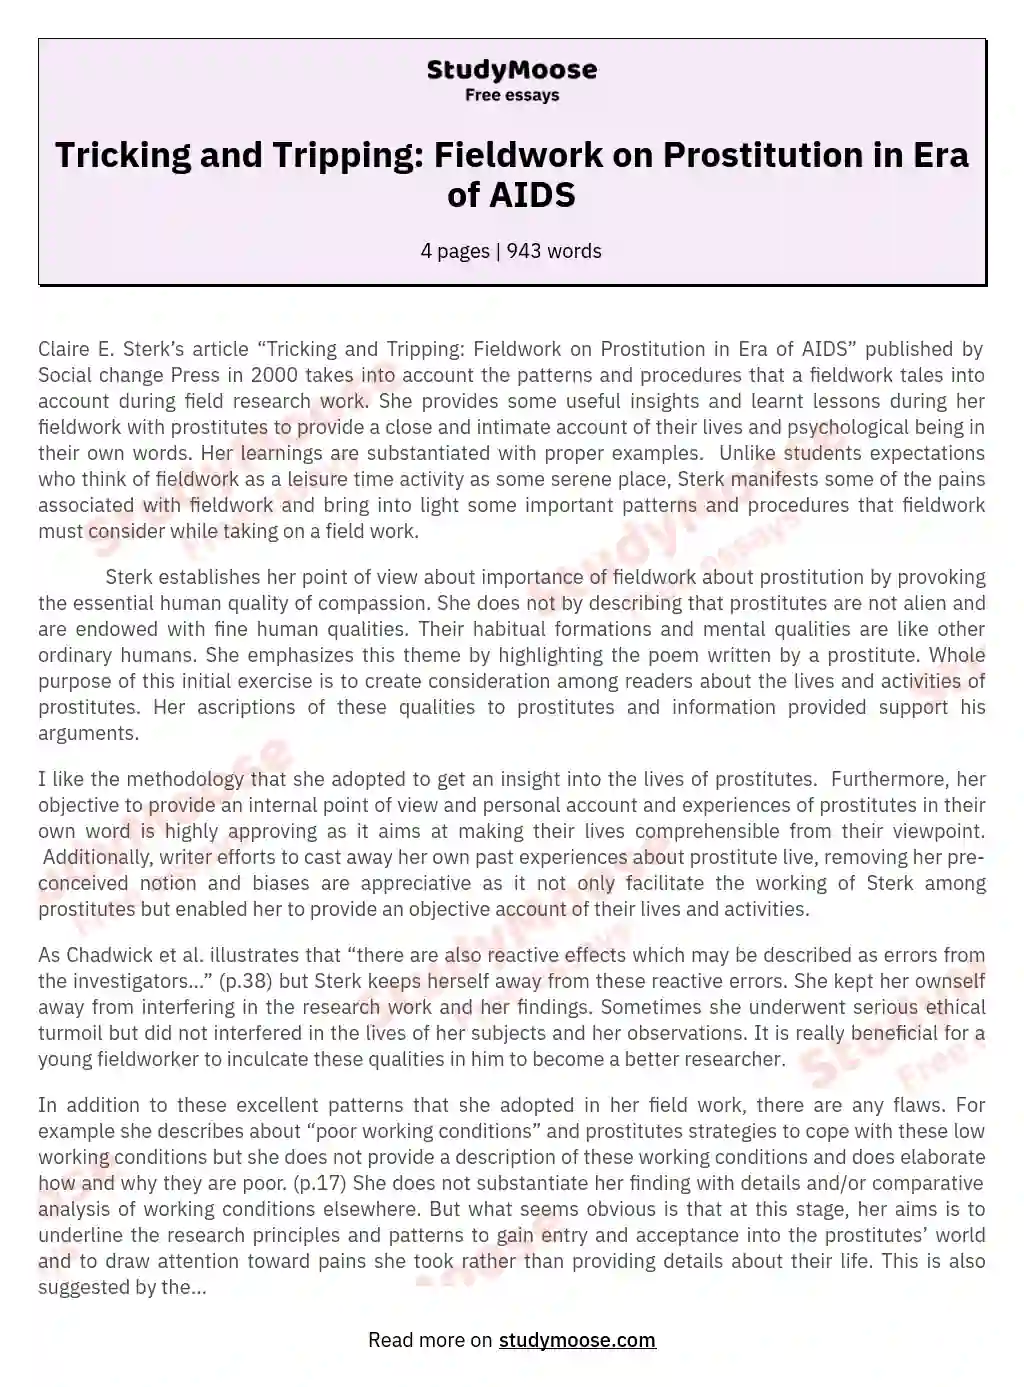 Tricking and Tripping: Fieldwork on Prostitution in Era of AIDS essay